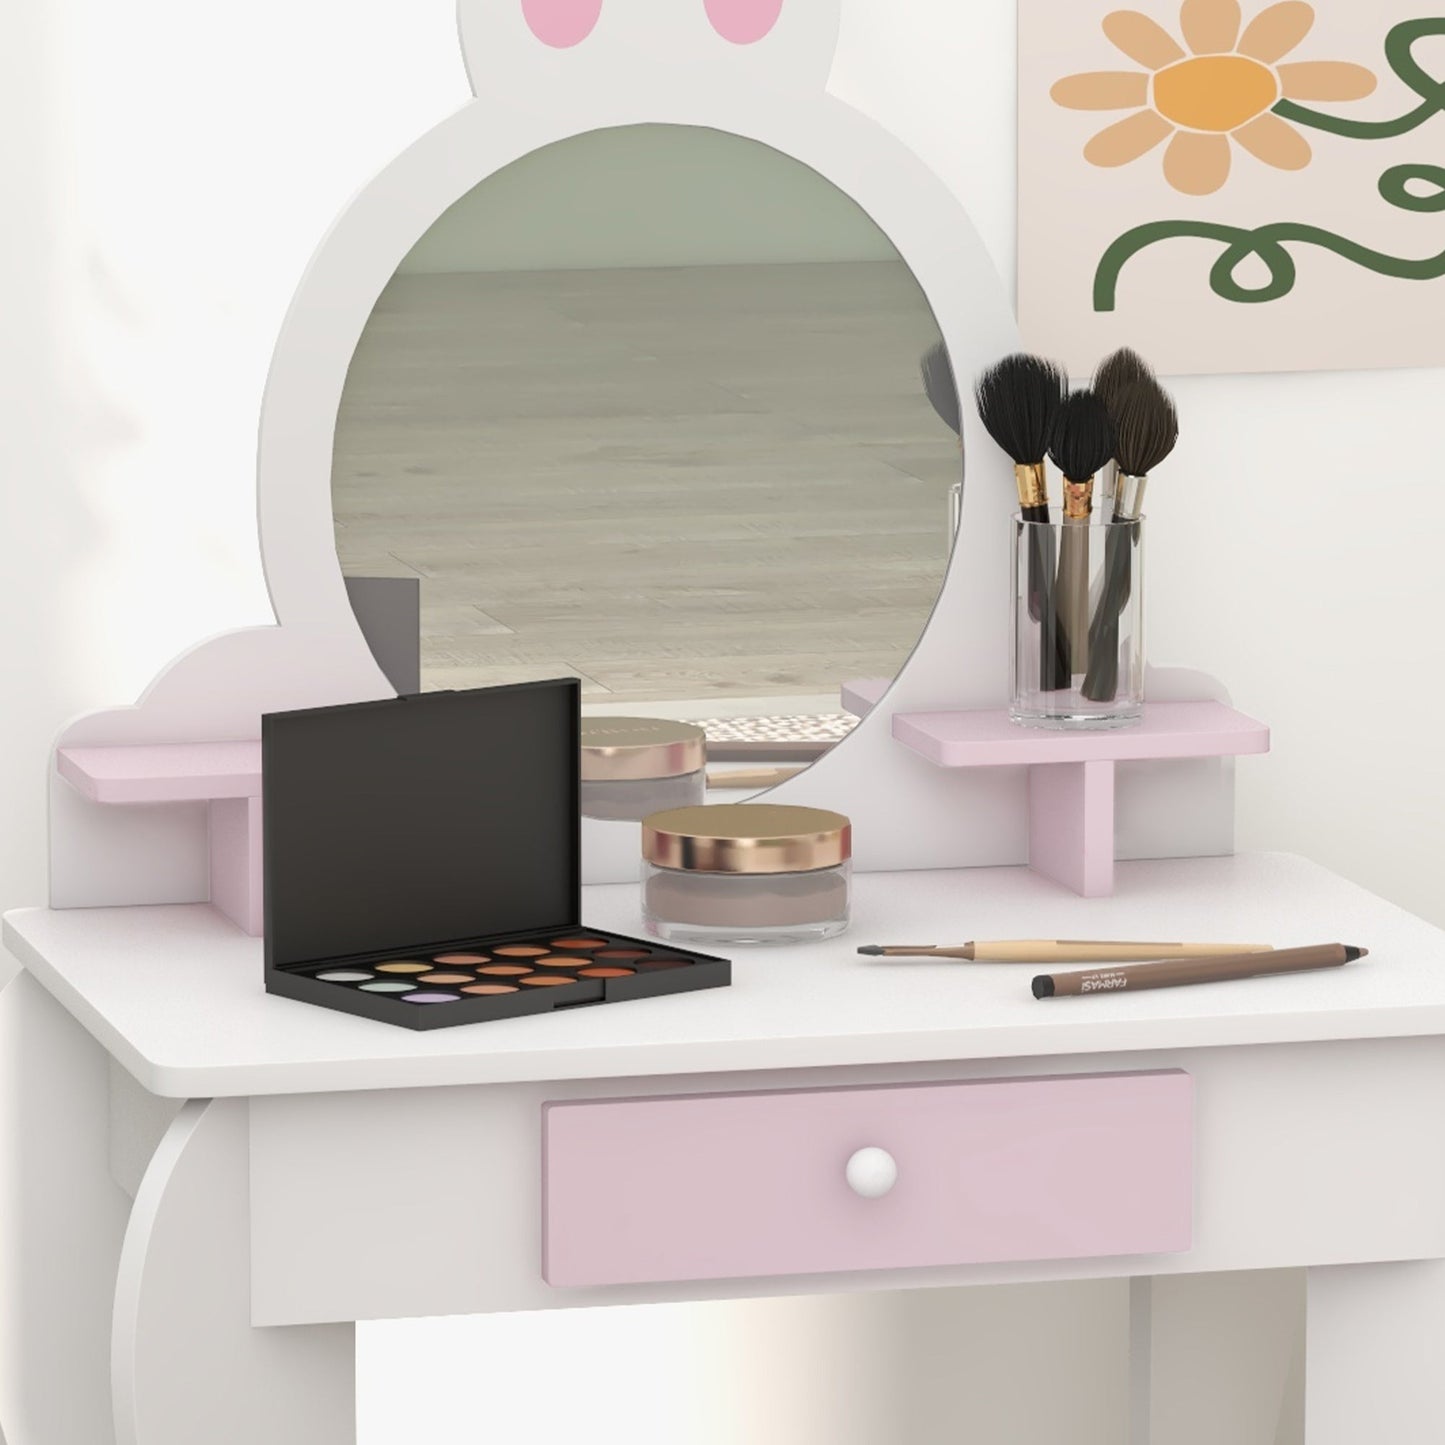 ZONEKIZ Bunny-Design Kids Dressing Table, with Mirror and Stool - White and Pink